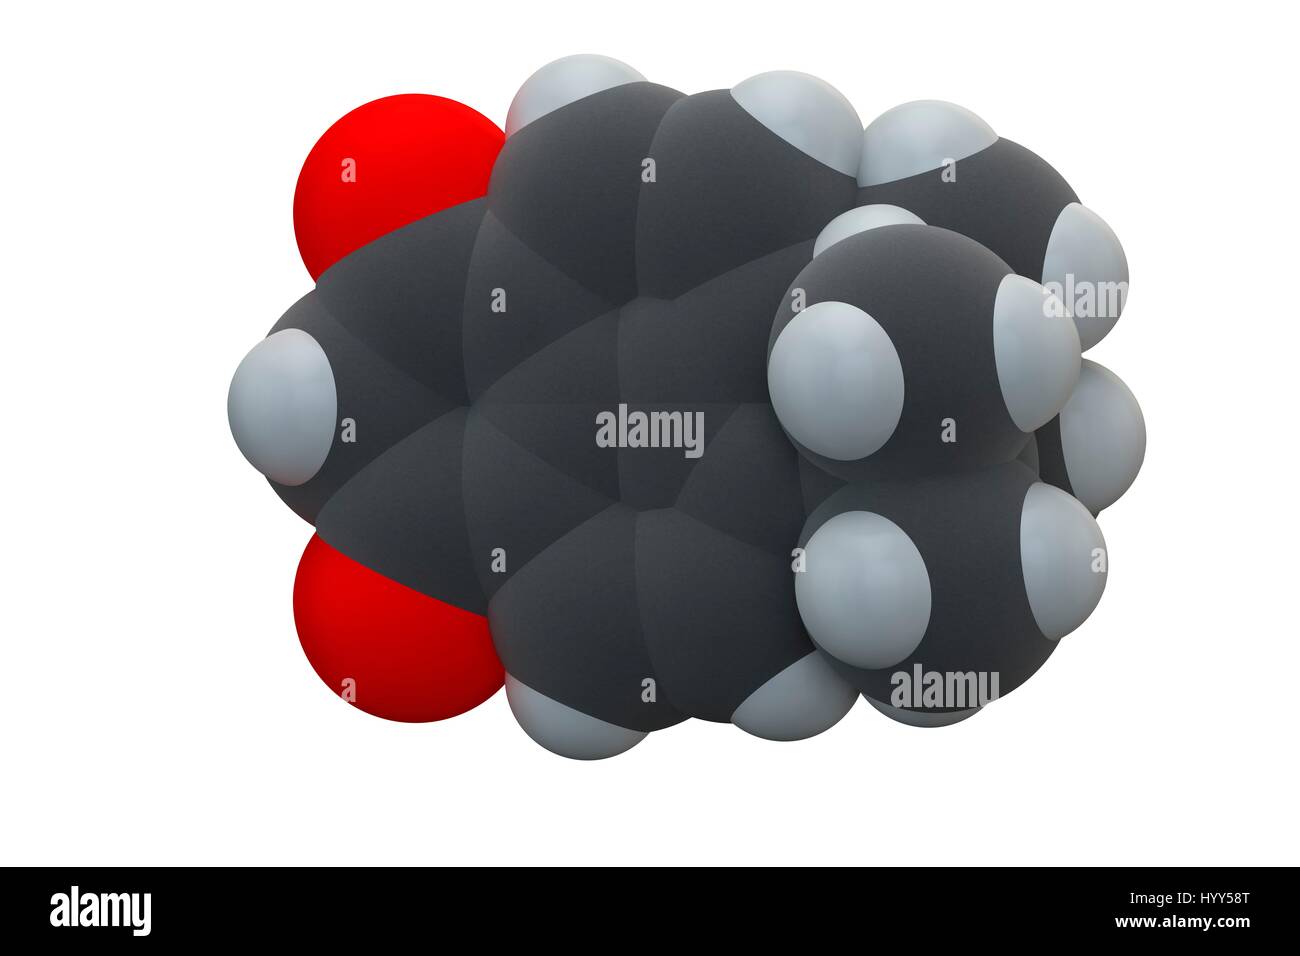 Avobenzone sunscreen molecule (UV filter). Chemical formula is C20H22O3. Atoms are represented as spheres: carbon (grey), hydrogen (white), oxygen (red). Illustration. Stock Photo